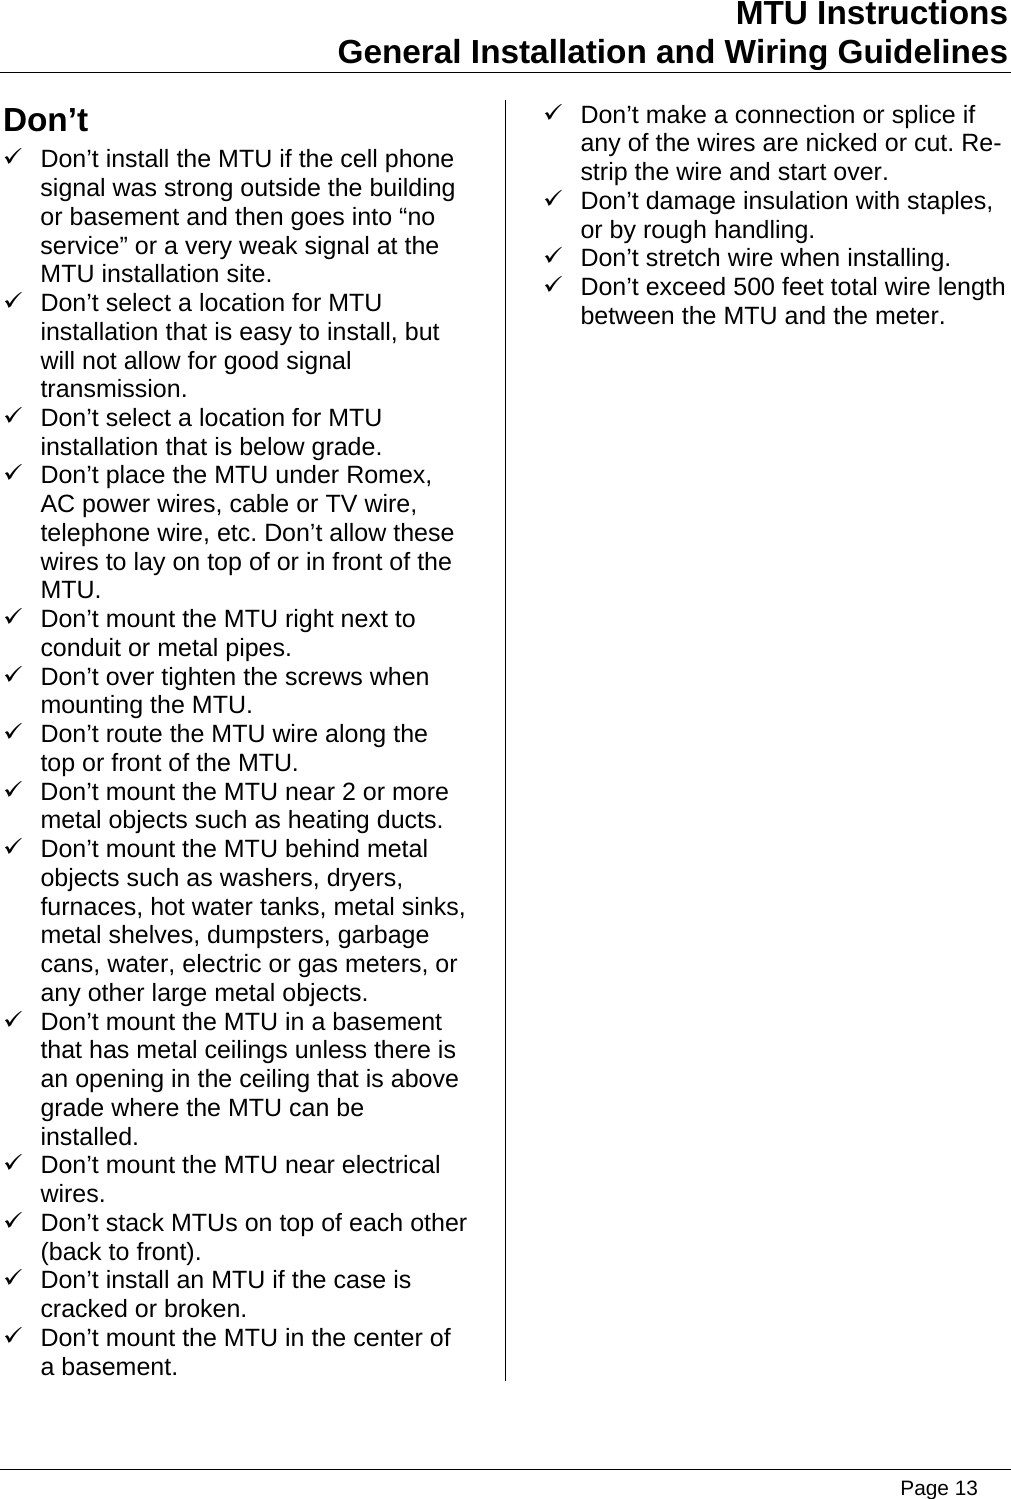 MTU Instructions General Installation and Wiring Guidelines Don’t  9  Don’t make a connection or splice if any of the wires are nicked or cut. Re-strip the wire and start over. 9  Don’t install the MTU if the cell phone signal was strong outside the building or basement and then goes into “no service” or a very weak signal at the MTU installation site. 9  Don’t damage insulation with staples, or by rough handling. 9  Don’t stretch wire when installing. 9  Don’t exceed 500 feet total wire length between the MTU and the meter. 9  Don’t select a location for MTU installation that is easy to install, but will not allow for good signal transmission. 9  Don’t select a location for MTU installation that is below grade. 9  Don’t place the MTU under Romex, AC power wires, cable or TV wire, telephone wire, etc. Don’t allow these wires to lay on top of or in front of the MTU. 9  Don’t mount the MTU right next to conduit or metal pipes. 9  Don’t over tighten the screws when mounting the MTU. 9  Don’t route the MTU wire along the top or front of the MTU. 9  Don’t mount the MTU near 2 or more metal objects such as heating ducts. 9  Don’t mount the MTU behind metal objects such as washers, dryers, furnaces, hot water tanks, metal sinks, metal shelves, dumpsters, garbage cans, water, electric or gas meters, or any other large metal objects. 9  Don’t mount the MTU in a basement that has metal ceilings unless there is an opening in the ceiling that is above grade where the MTU can be installed. 9  Don’t mount the MTU near electrical wires. 9  Don’t stack MTUs on top of each other (back to front). 9  Don’t install an MTU if the case is cracked or broken. 9  Don’t mount the MTU in the center of a basement.   Page 13